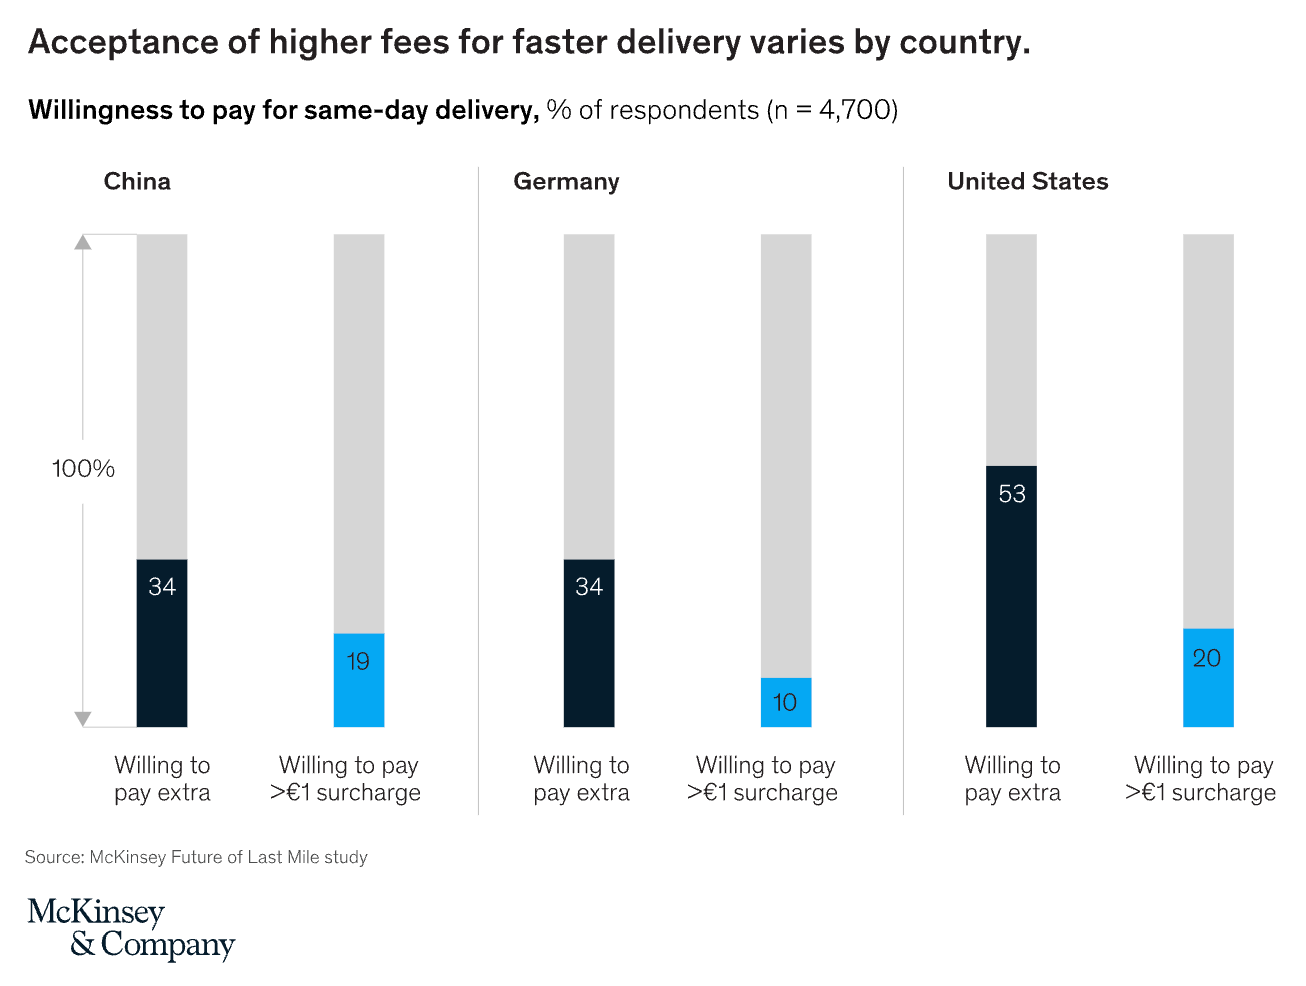 Willingness to pay extra for quick dleivery by country, McKinsey and company.